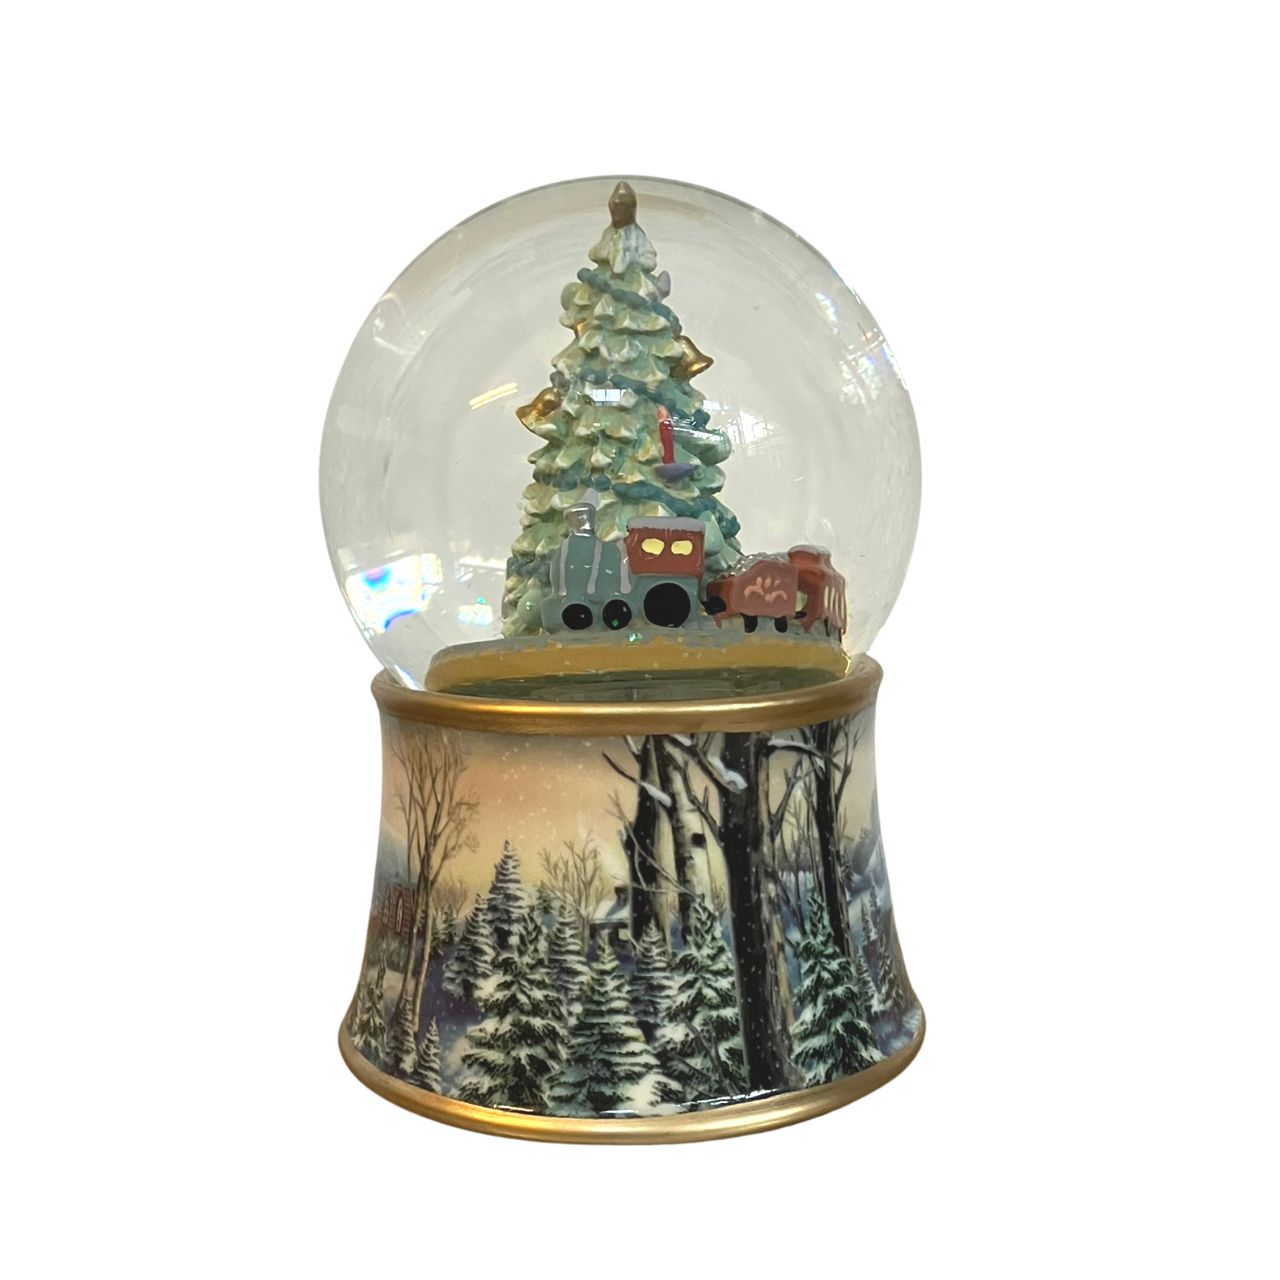 Music Box World Snow Globe Christmas Tree with Train  Featuring festive scenes and characters, add charm and personality to your home this Christmas with our fabulous snow globes  The Scene in the globe rotates to the melody “Oh Christmas Tree”